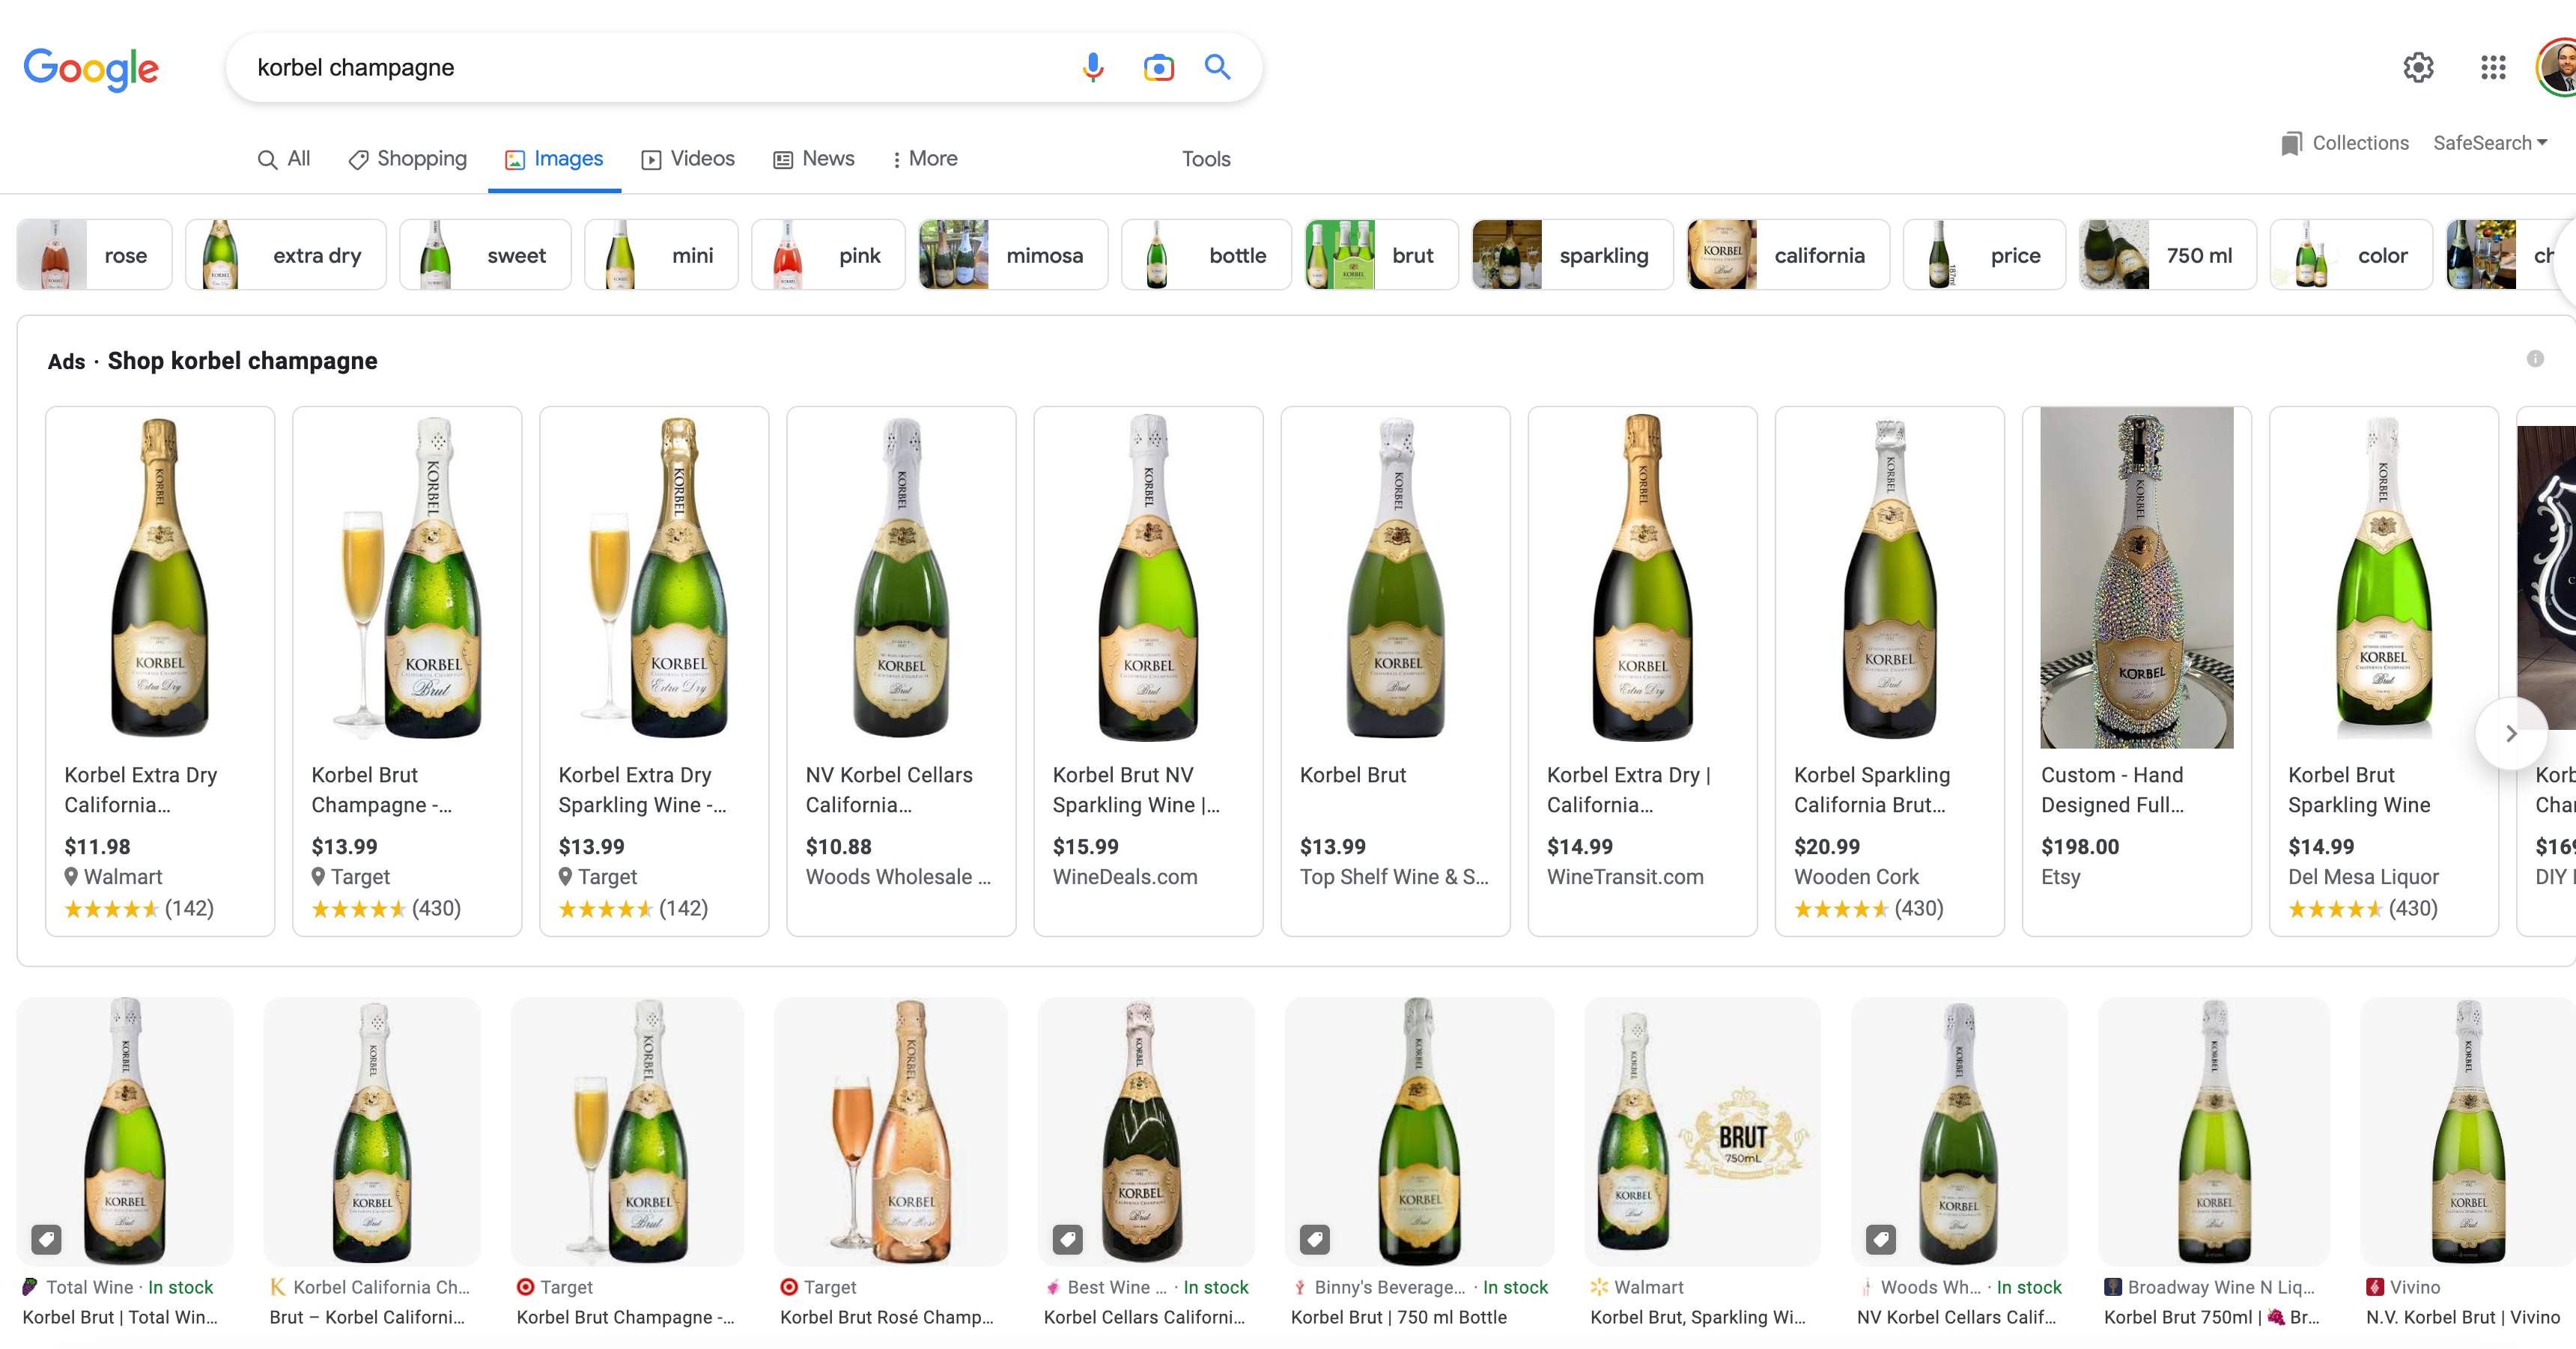 Korbel-Champagne-Google-Image-Search-Results